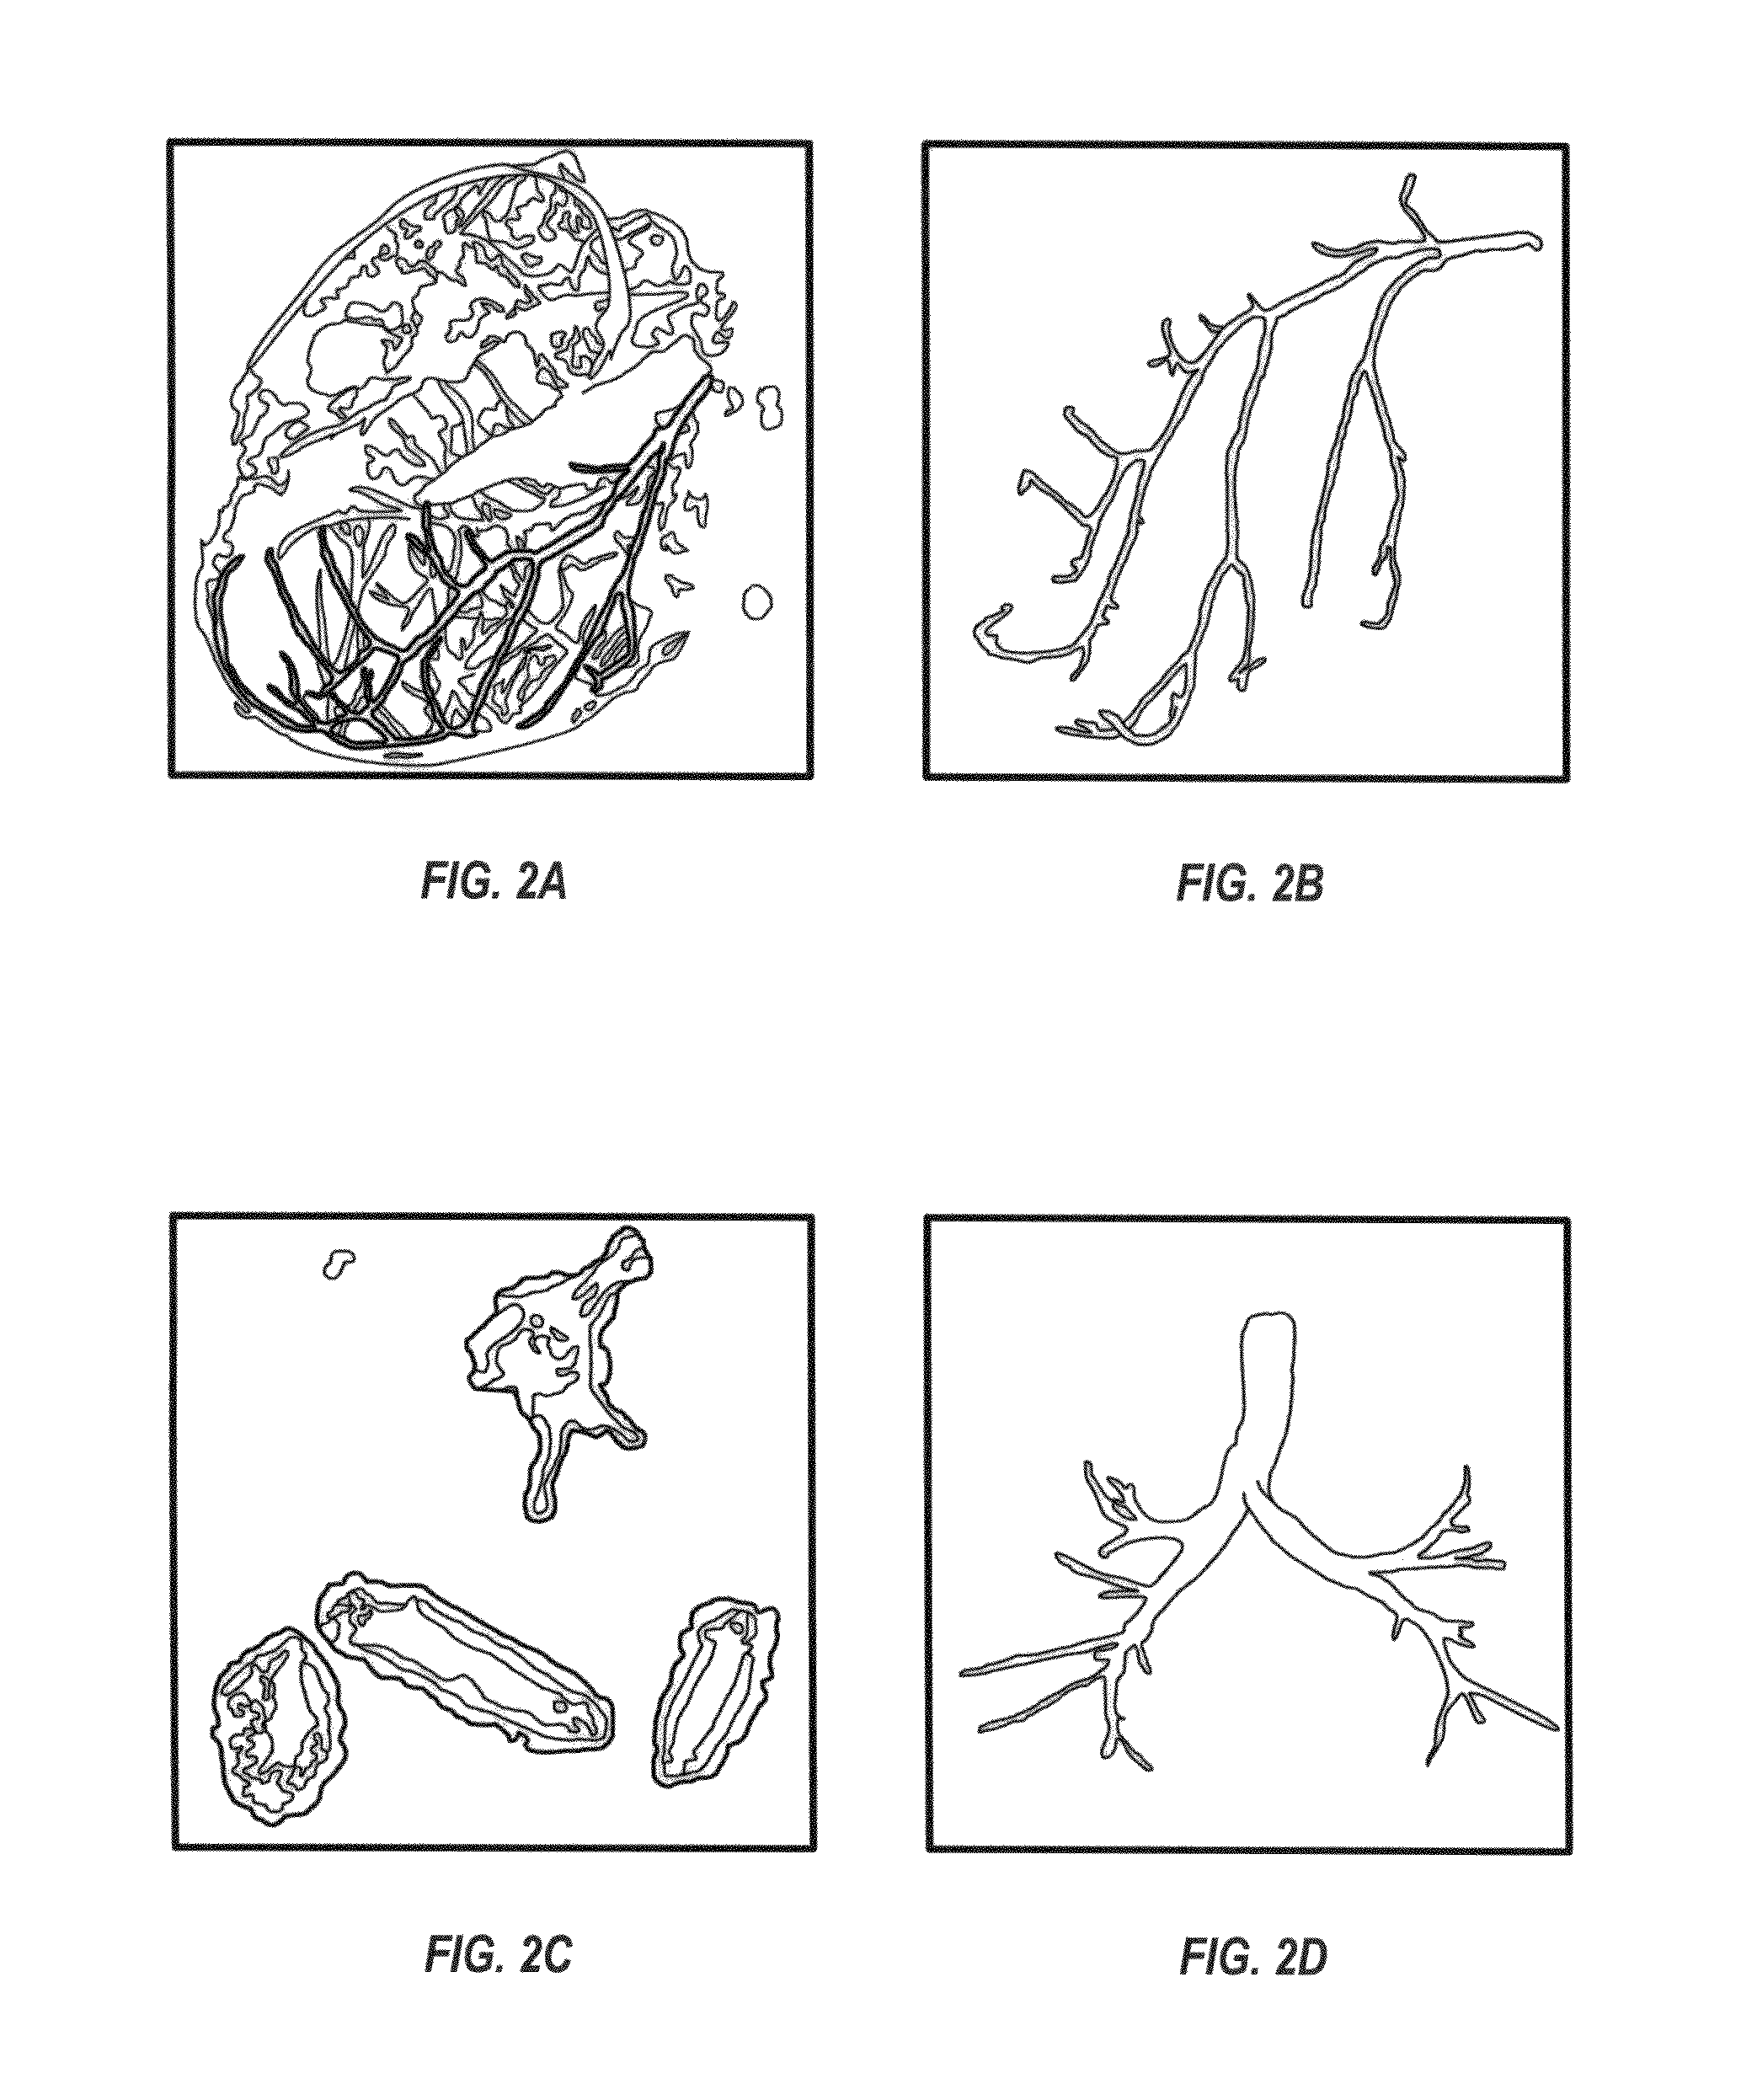 System and methods for image segmentation in N-dimensional space